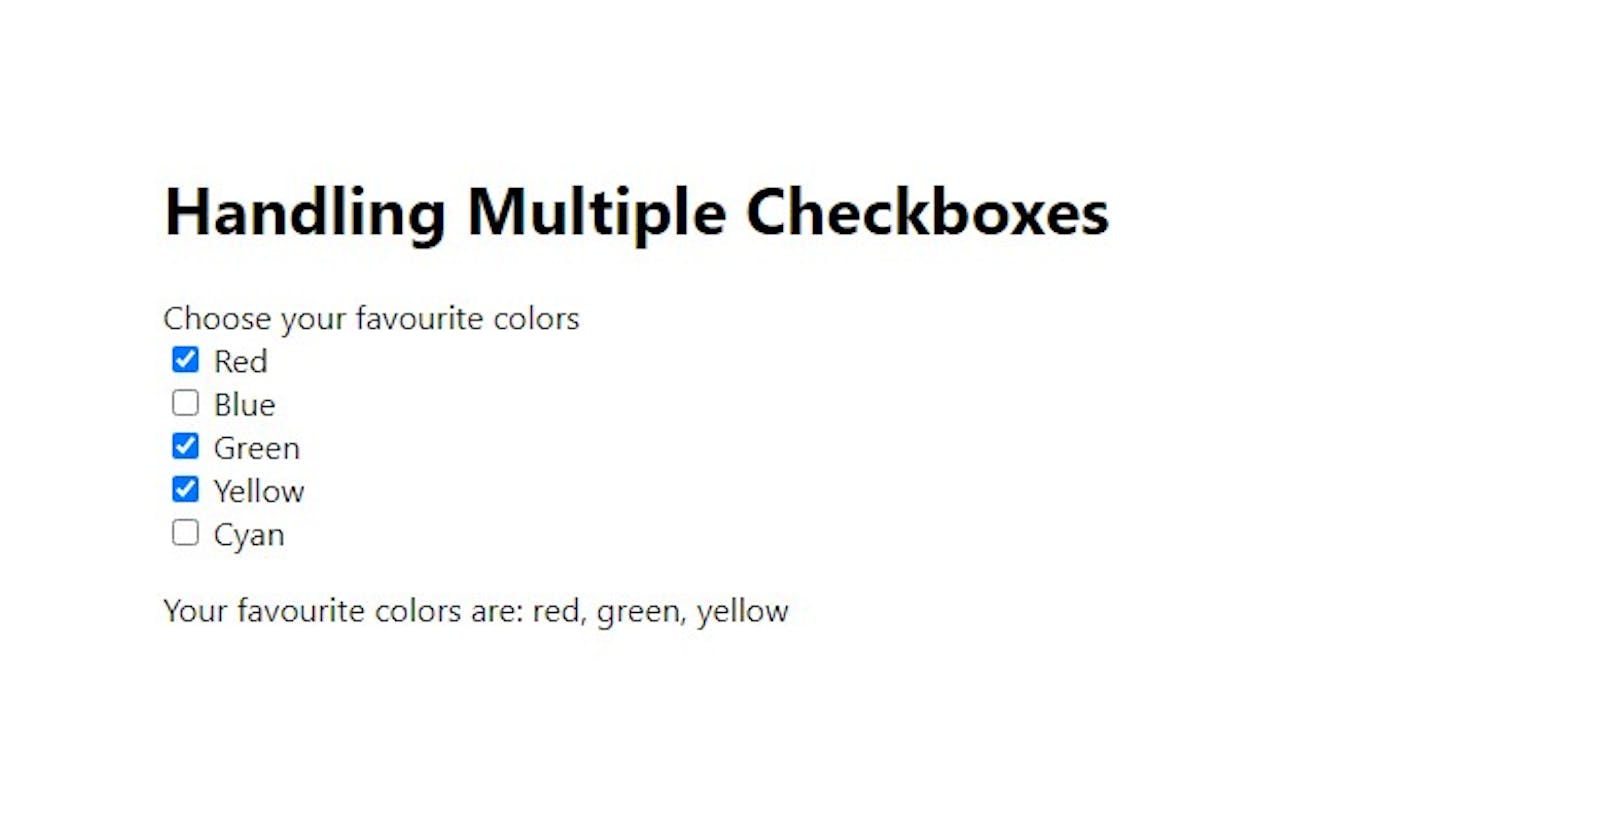 How I handled multiple checkboxes with react.js